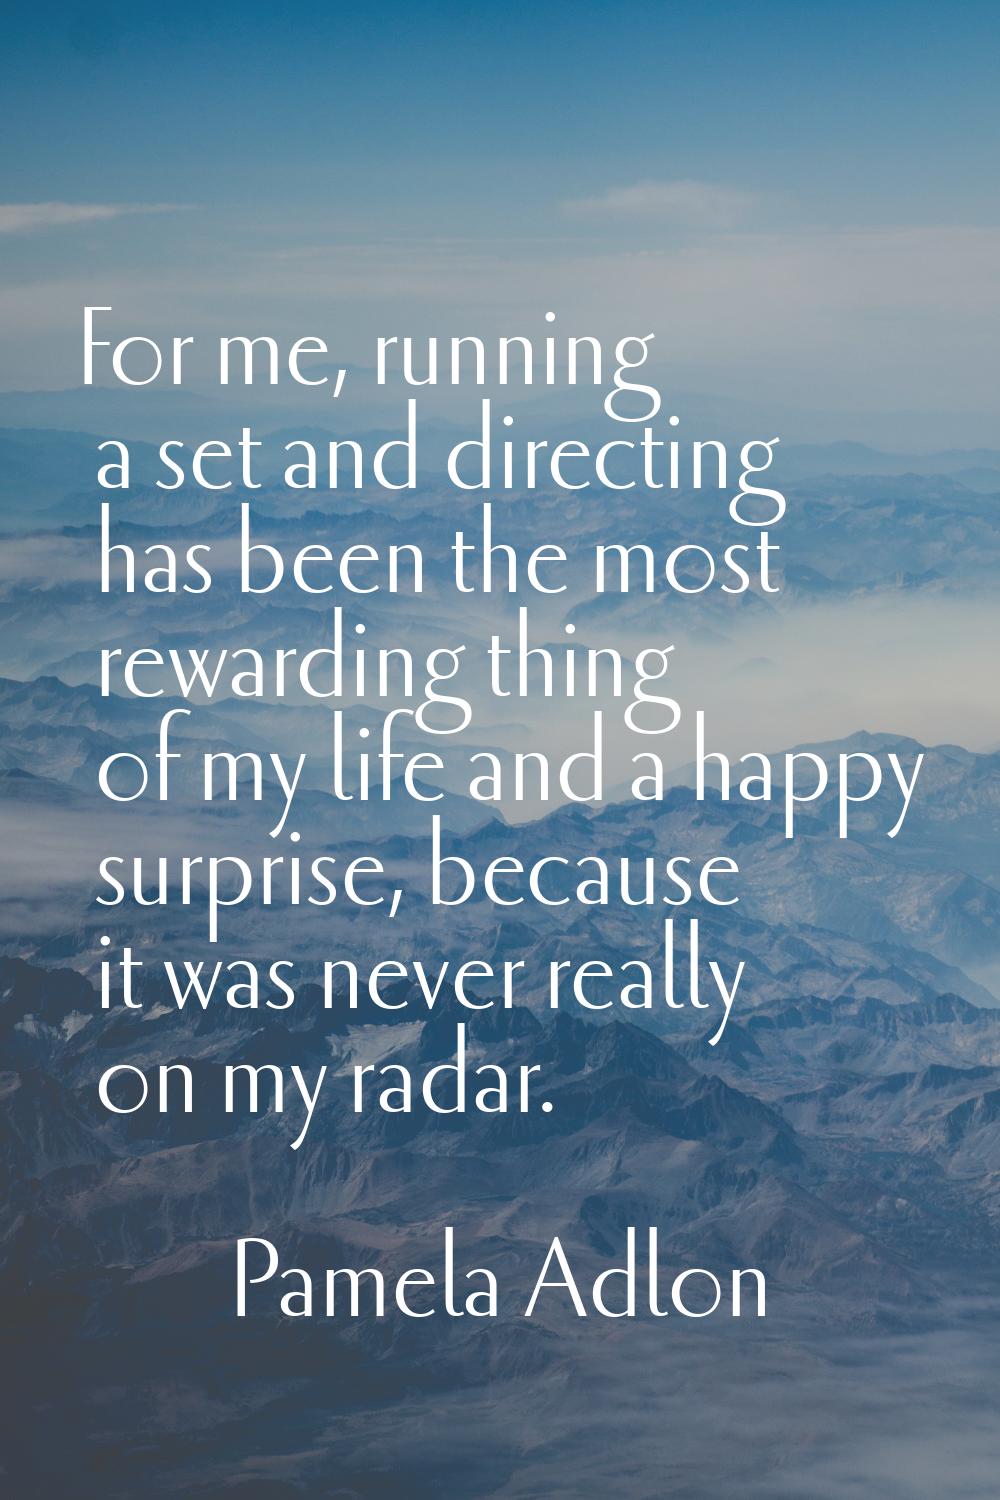 For me, running a set and directing has been the most rewarding thing of my life and a happy surpri